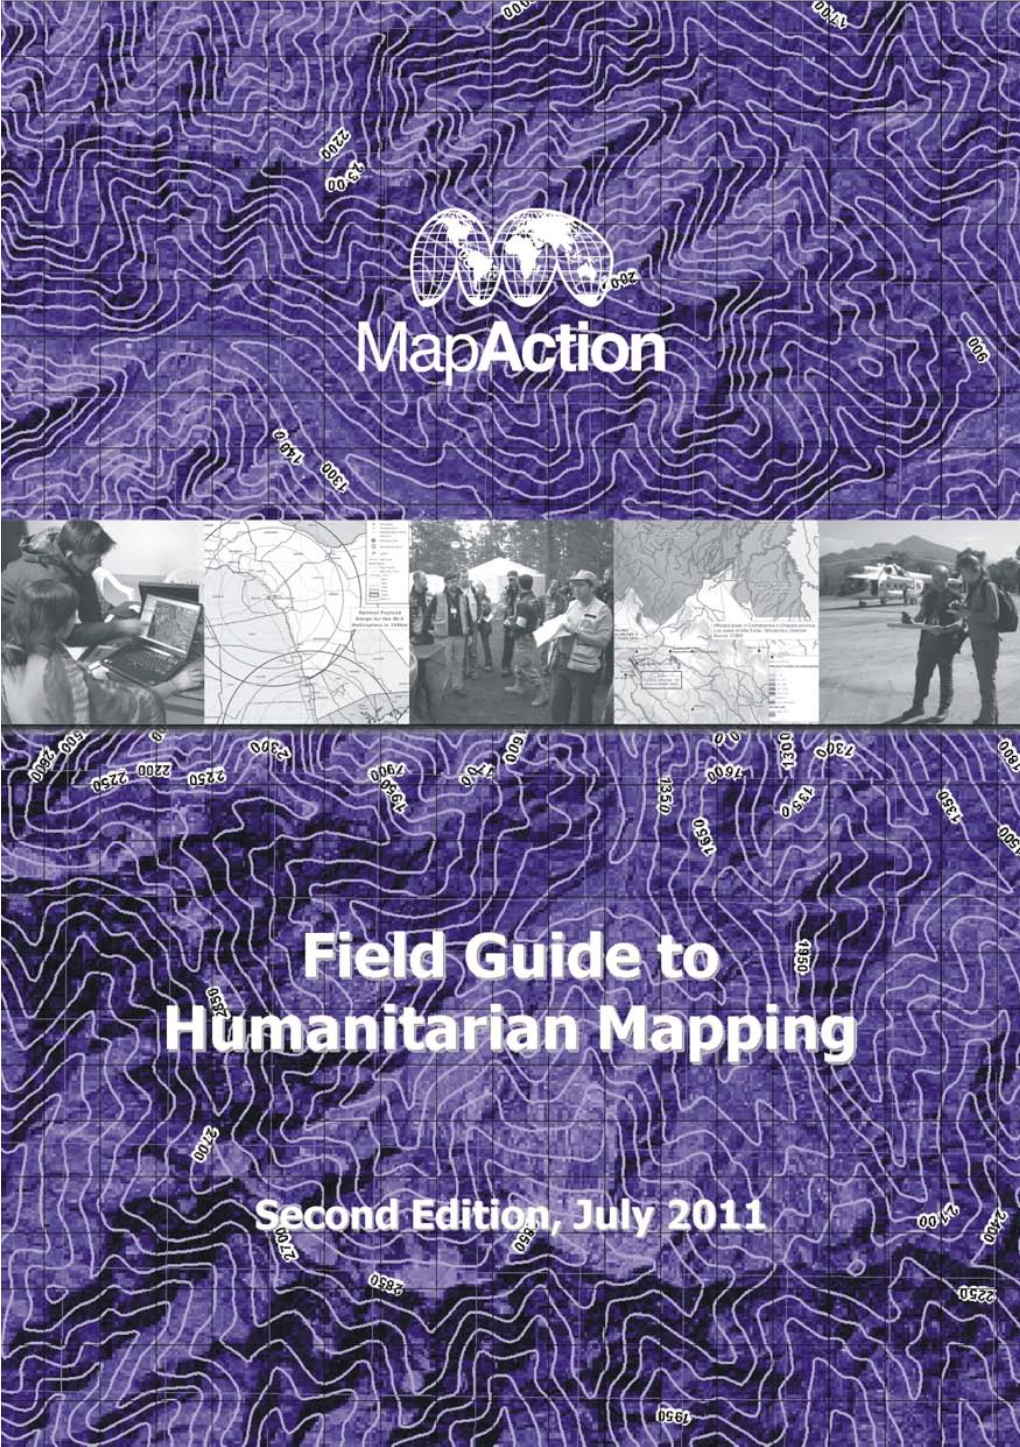 Field Guide to Humanitarian Mapping Second Edition, 2011